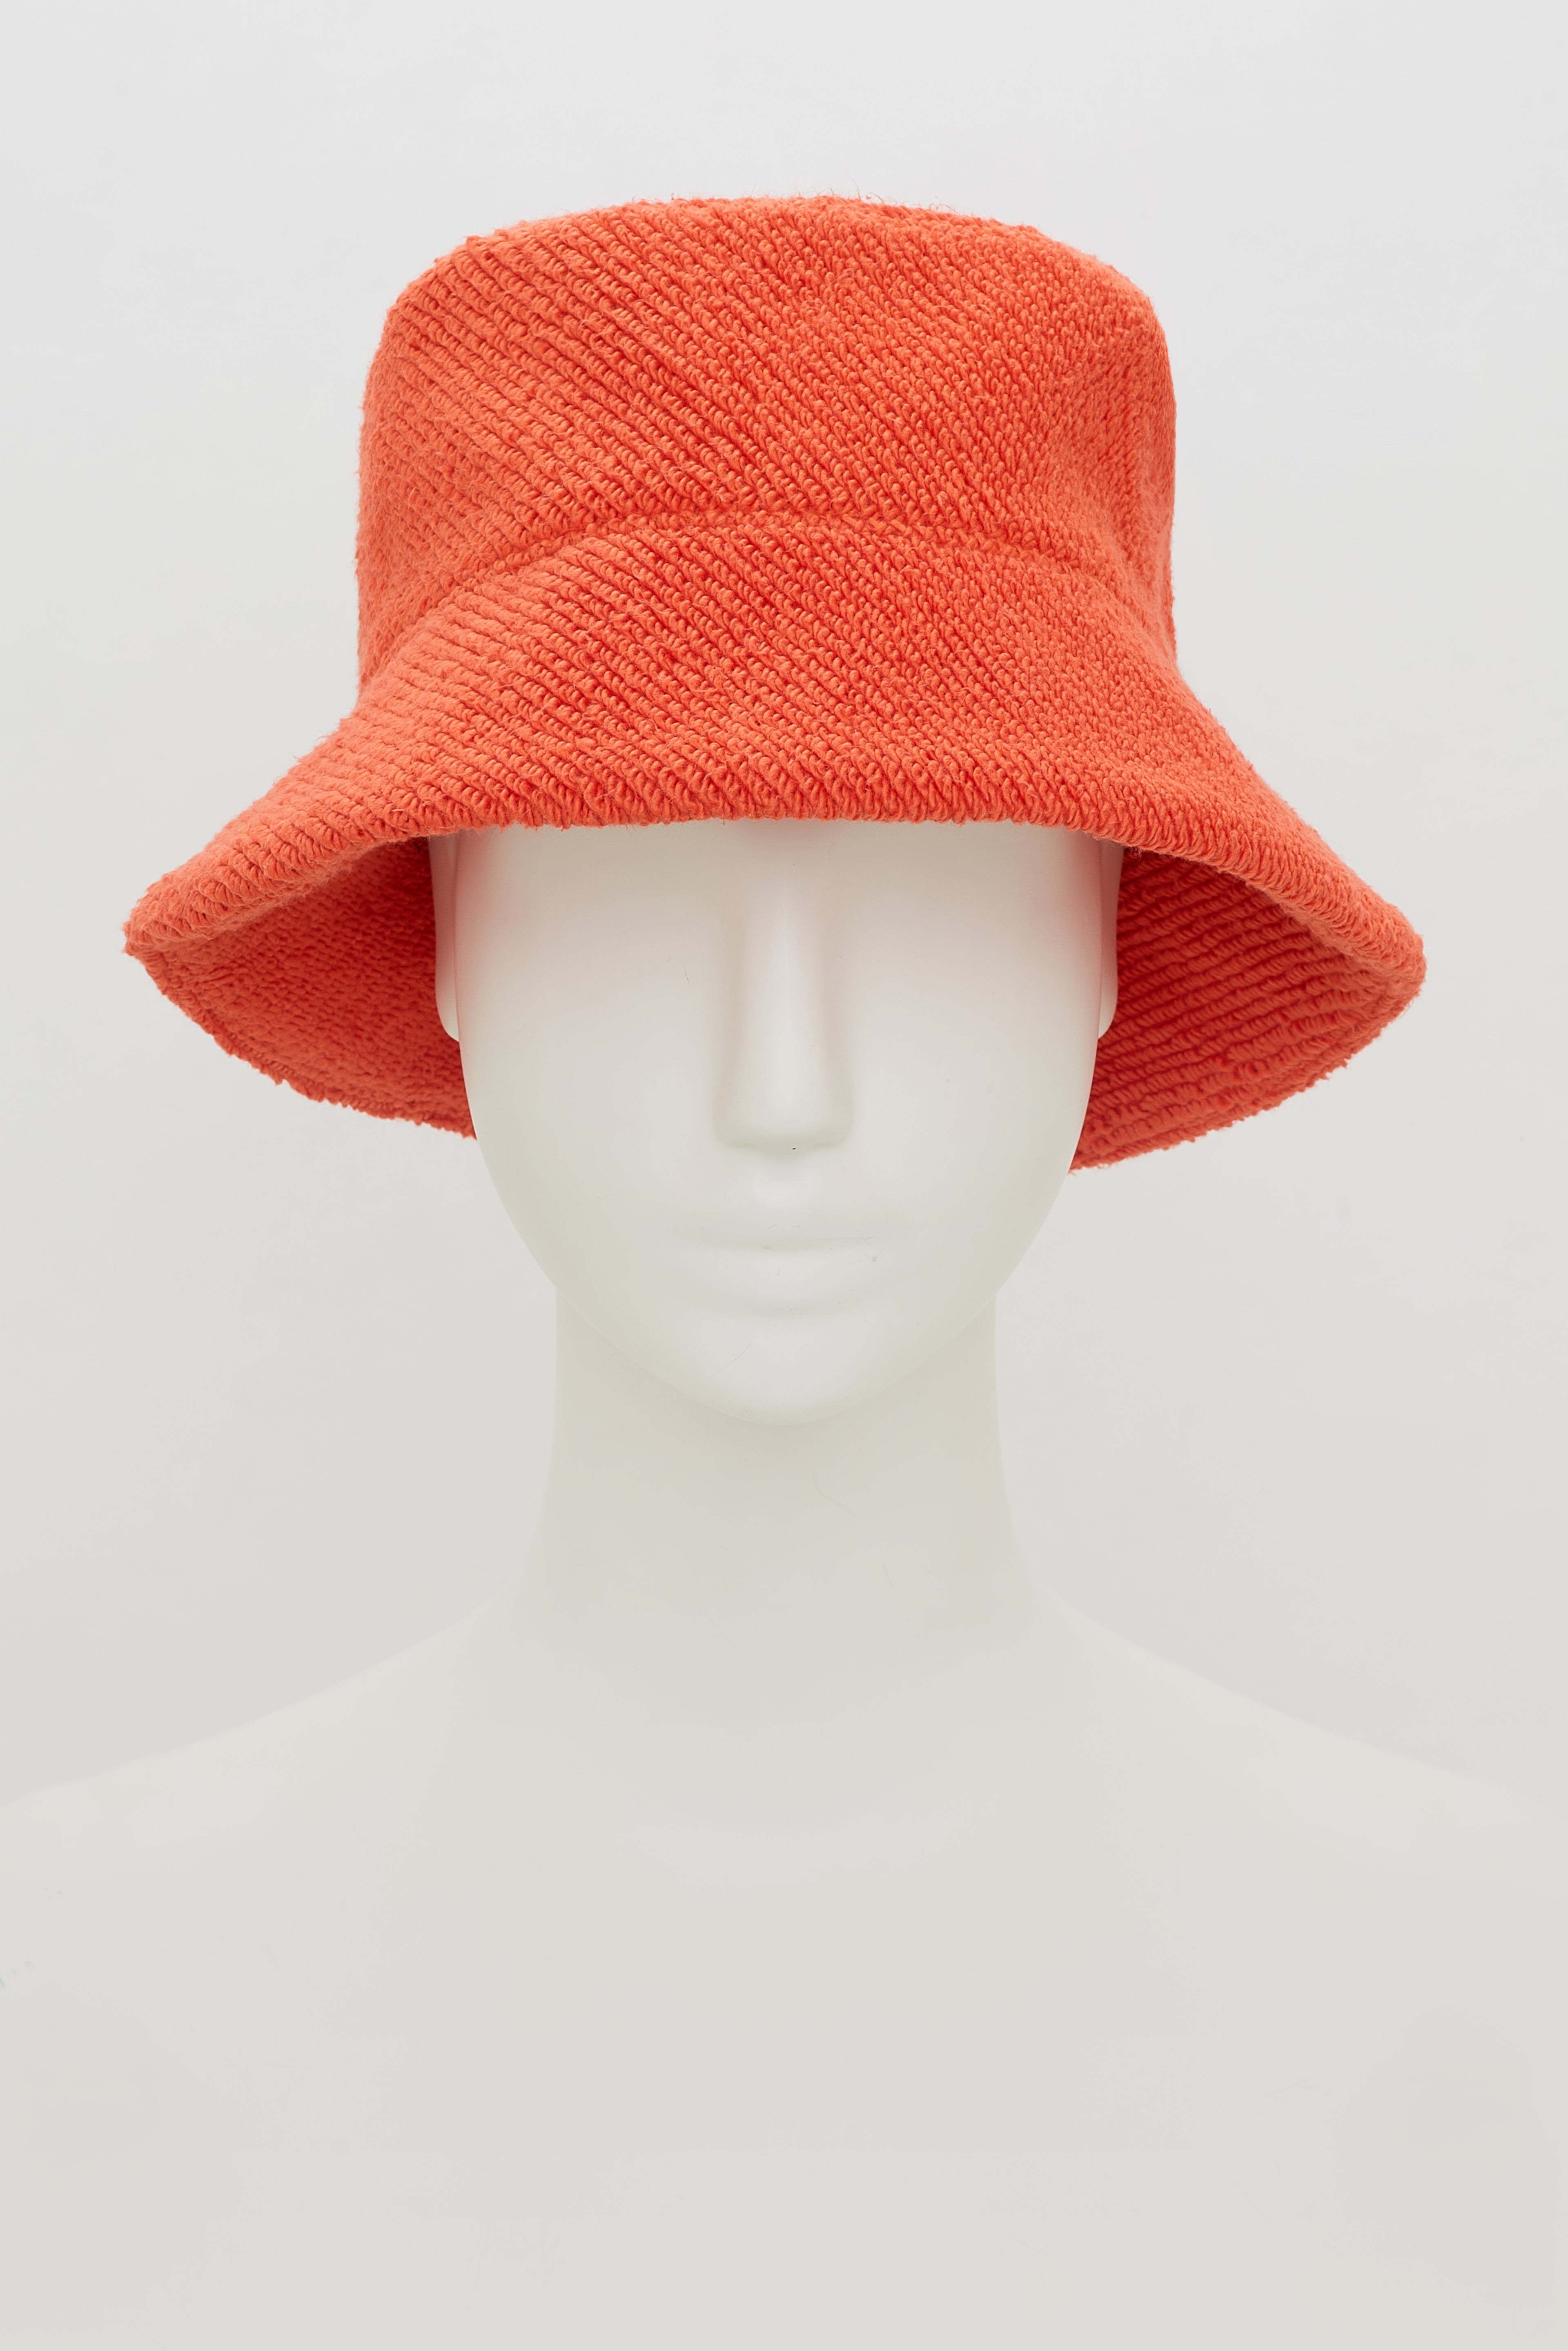 Dorothee-Schumacher-OUTLET-SALE-MODERN-TOWELLING-hat-Accessoires-OS-spiced-orange-ARCHIVE-COLLECTION.jpg